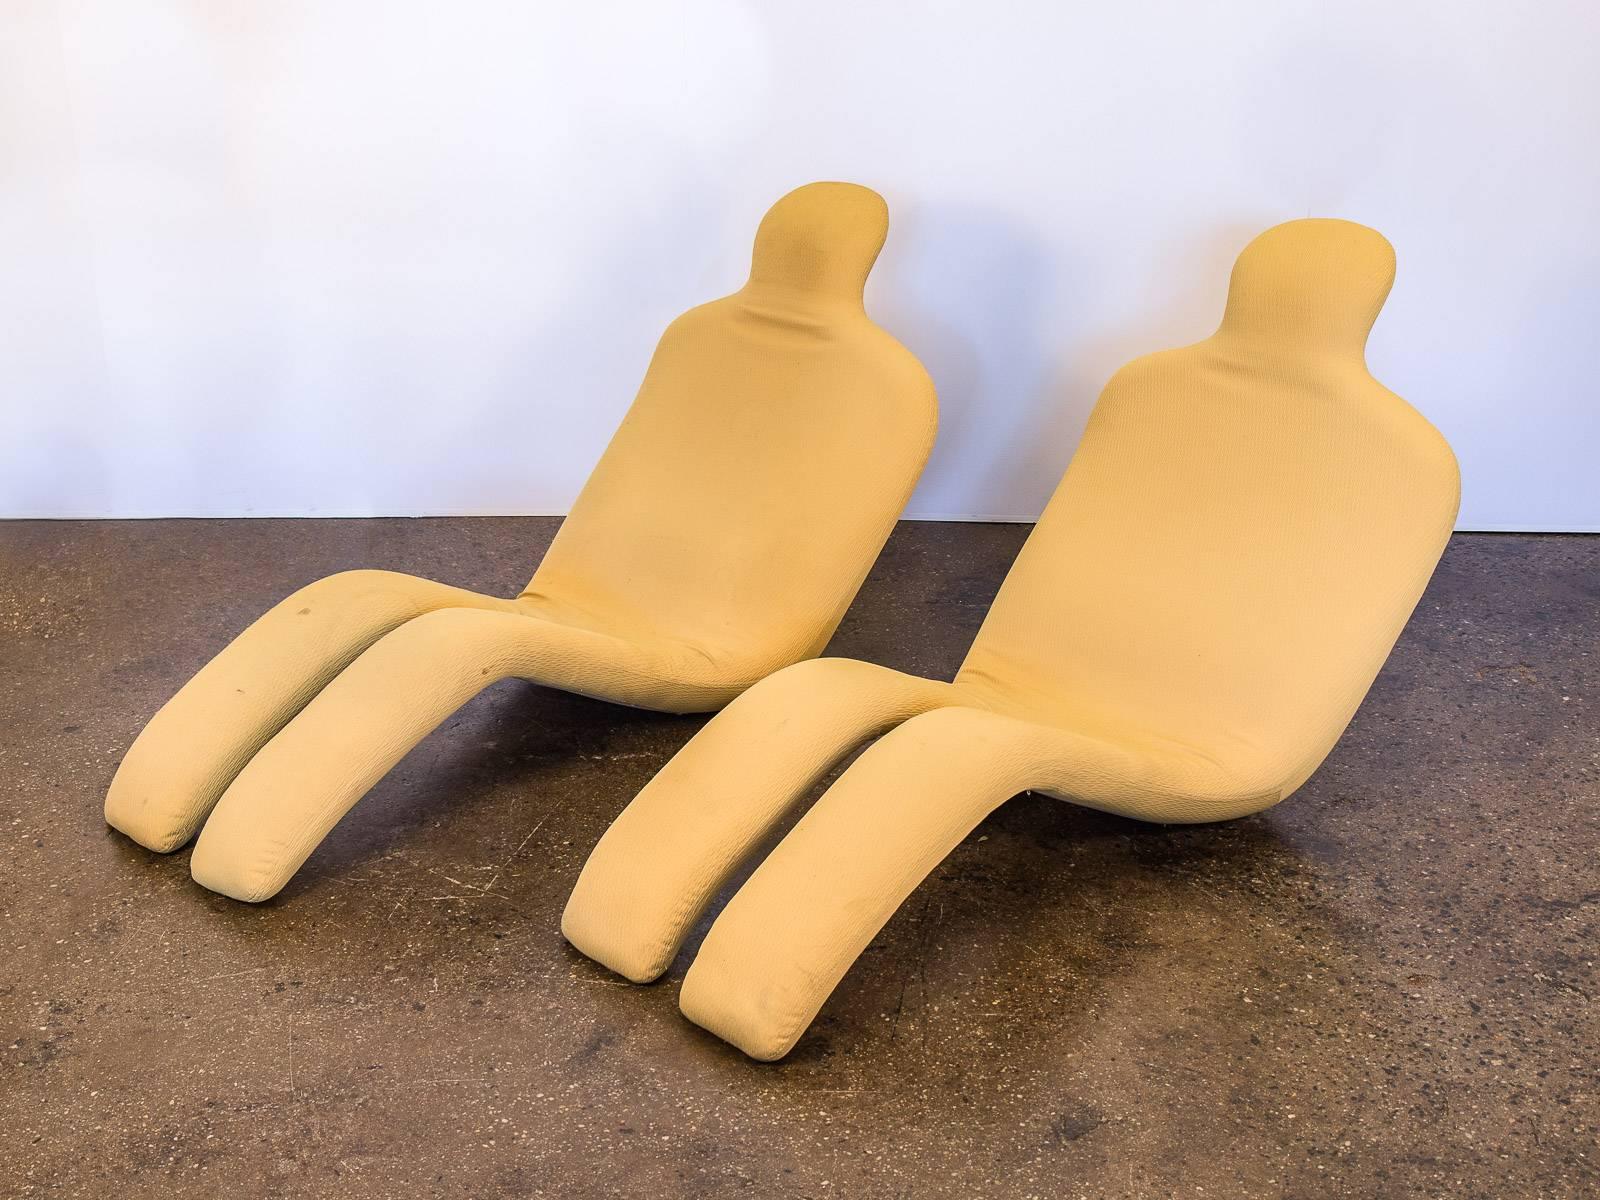 Pair of original Bouloum chairs designed by Olivier Mourgue. Innovative and bold, undulating anthropomorphic lounge chairs. A supremely comfortable chair that helped shape design modernity. In great condition, with some stains to the fabric on one